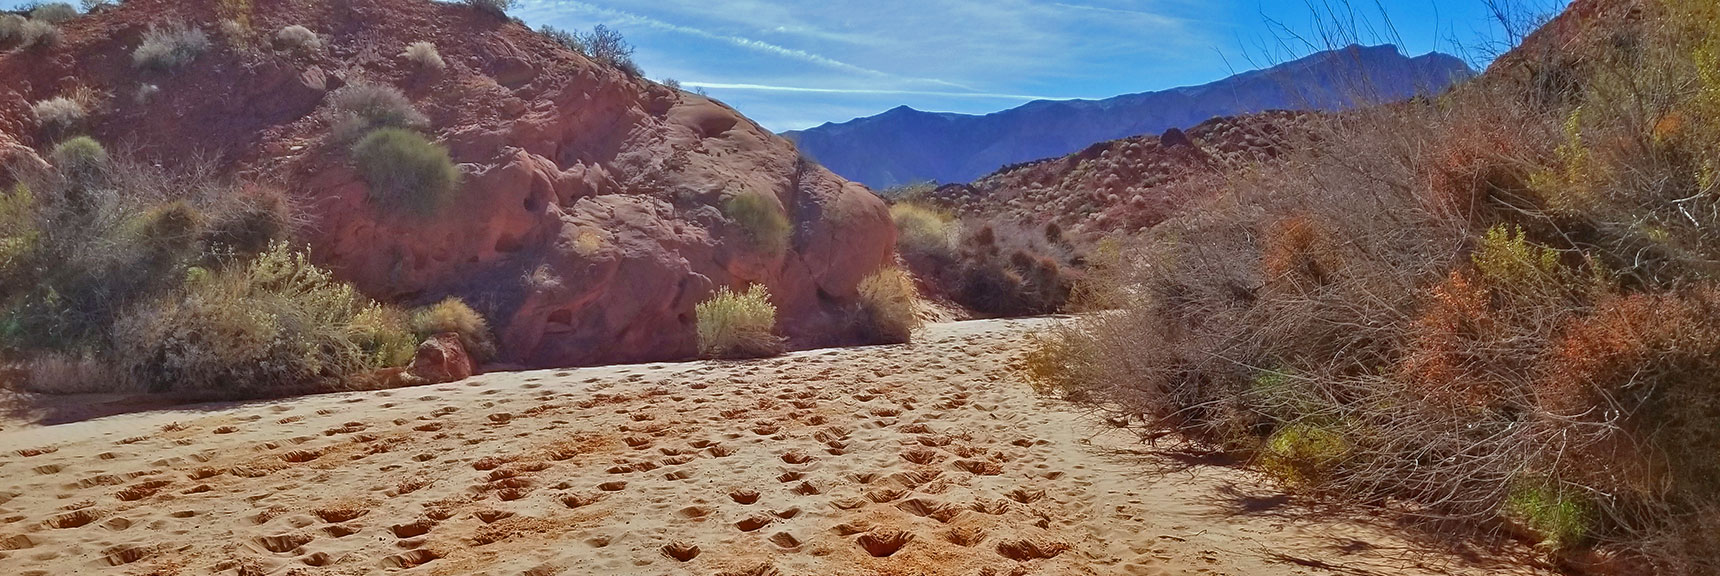 This Deep Sand Continues from the East Side of the Park to the WestHeading Toward Fire Canyon on Natural Arches Trail, Valley of Fire State Park, Nevada